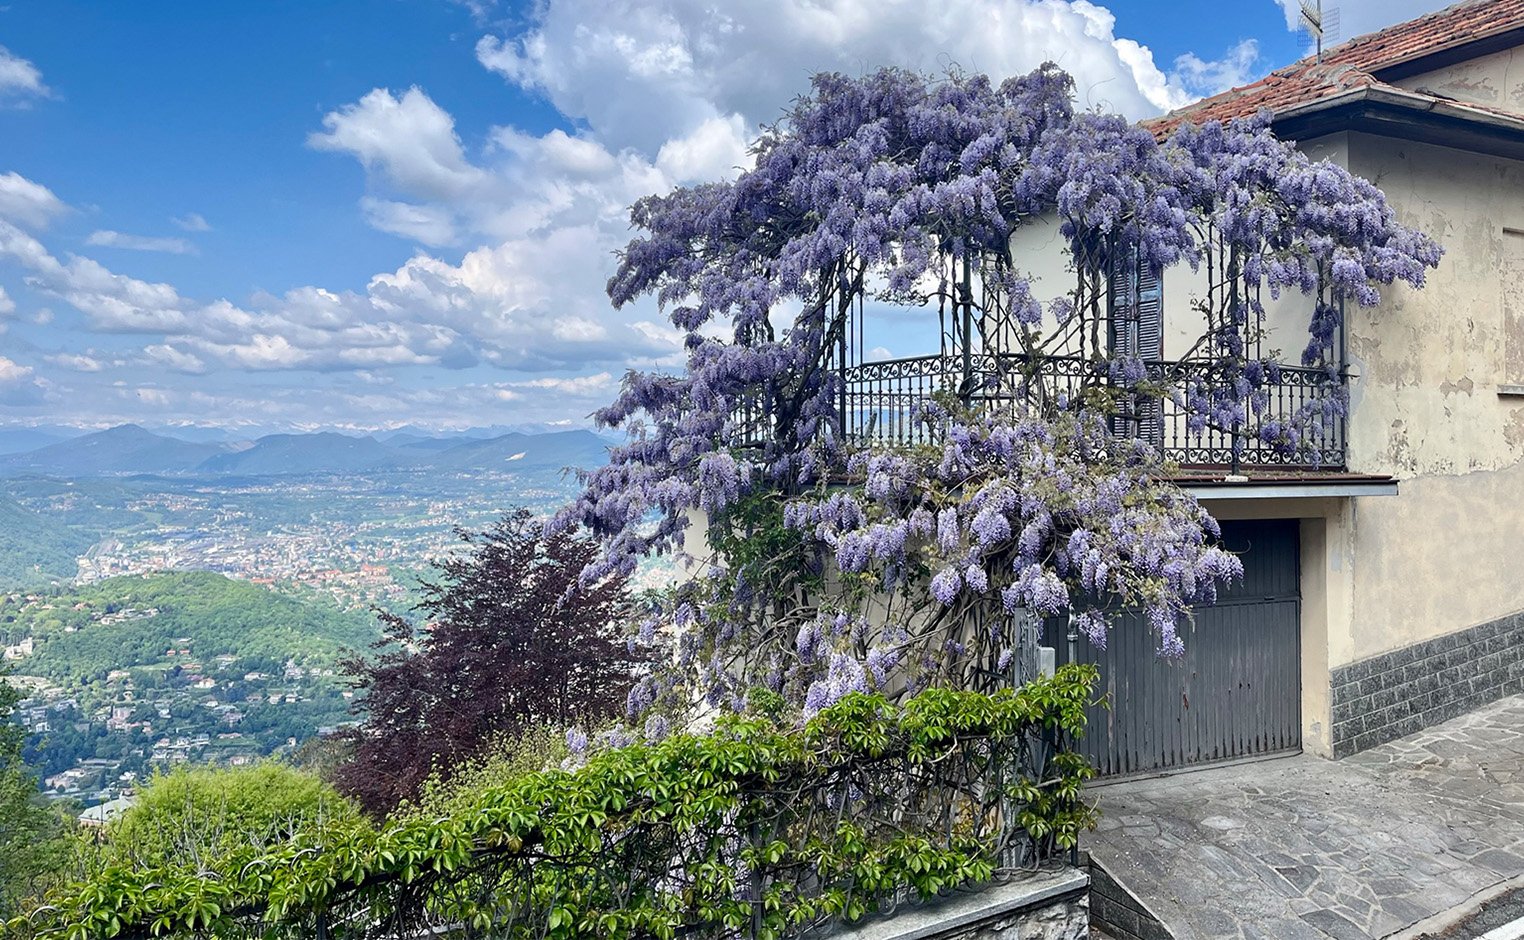 Building covered by flowery purple vine on mountain peak overlooking town